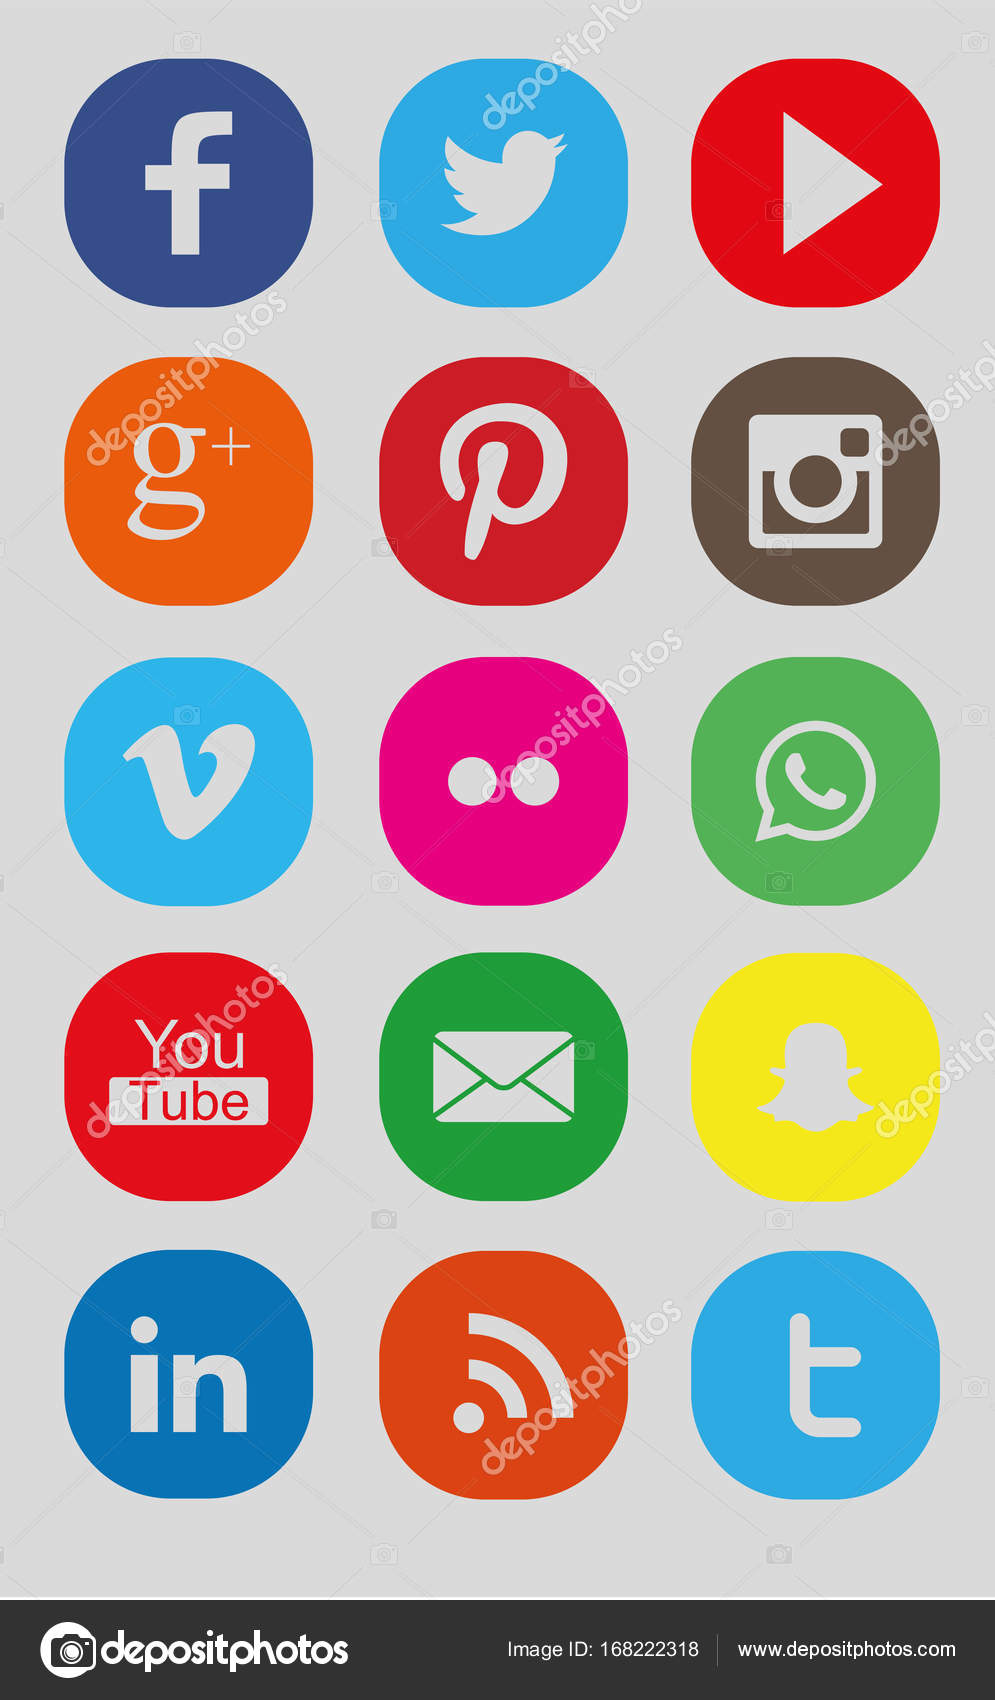 Big Collection Of Round Square Color Icons Like Facebook Twitter Youtube Google Plus Pinterest Instagram Vimeo Flickr Whatsapp Snapchat Mail Linkedin Rss All Are Png Compatible With Alpha Stock Vector Image By C Bigxteq